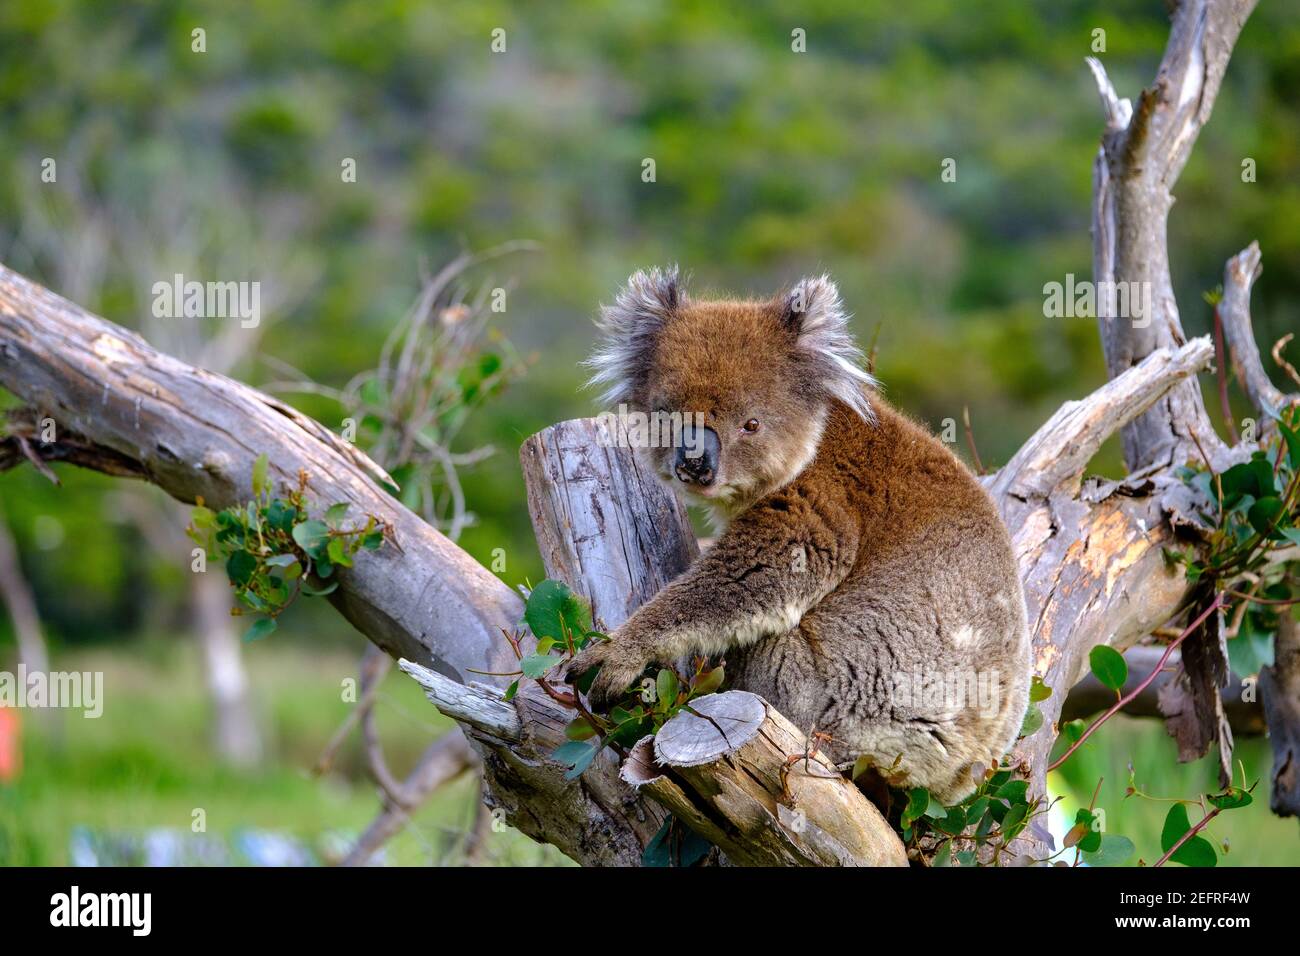 A Koala sitting in in a eucalyptus tree at Aire River West camp ground Stock Photo